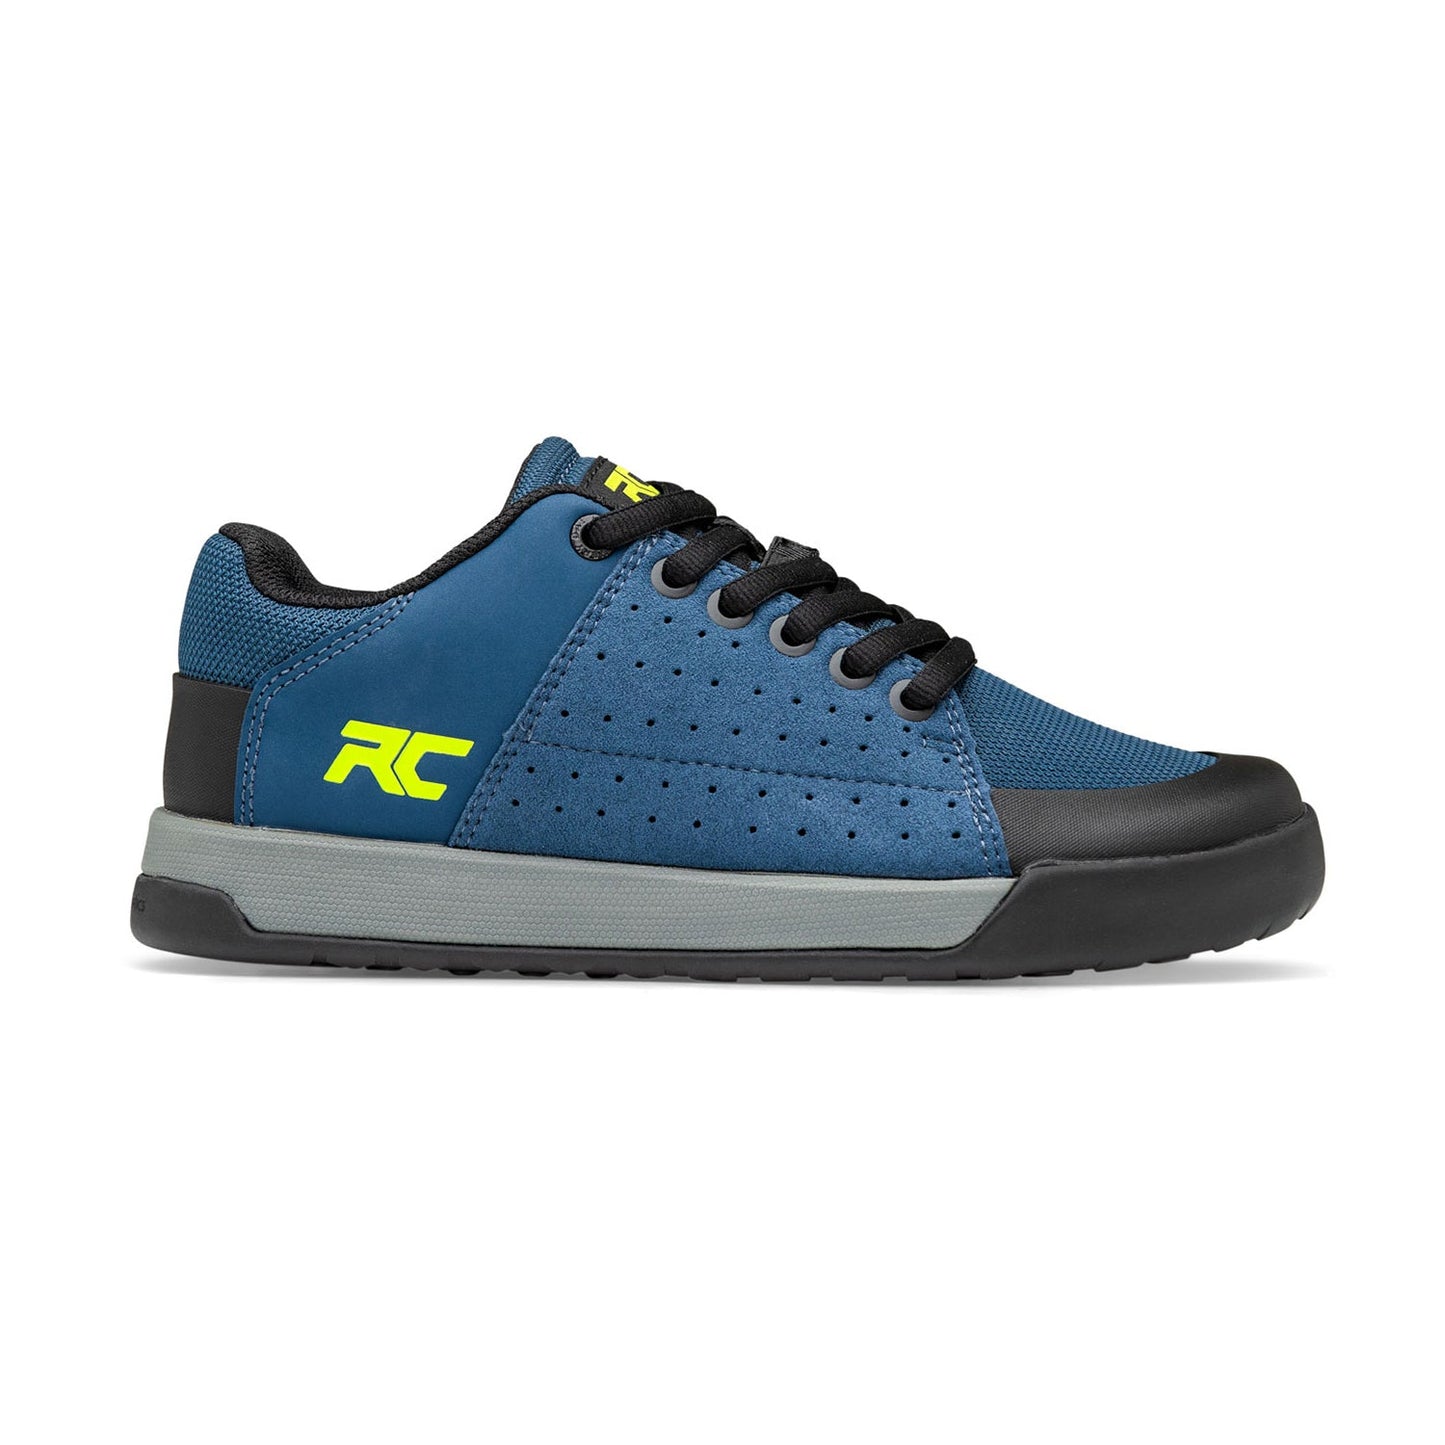 Ride Concepts Livewire Youth Flat Shoes - US 3.0 - Blue Smoke - Lime